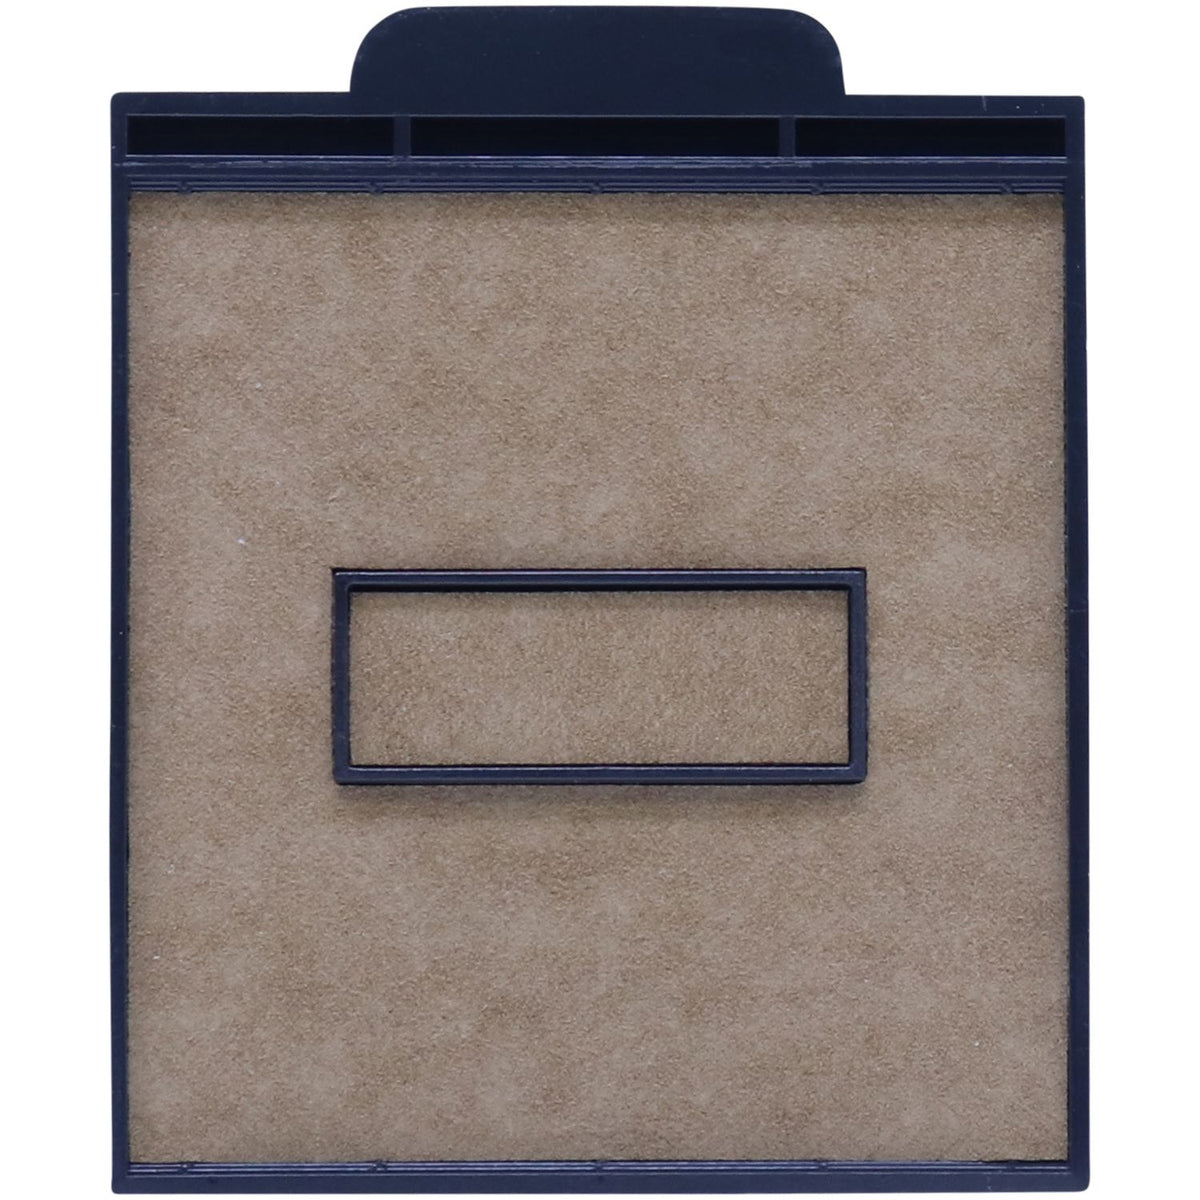 two-color-replacement-ink-pad-for-hm-6109-dry